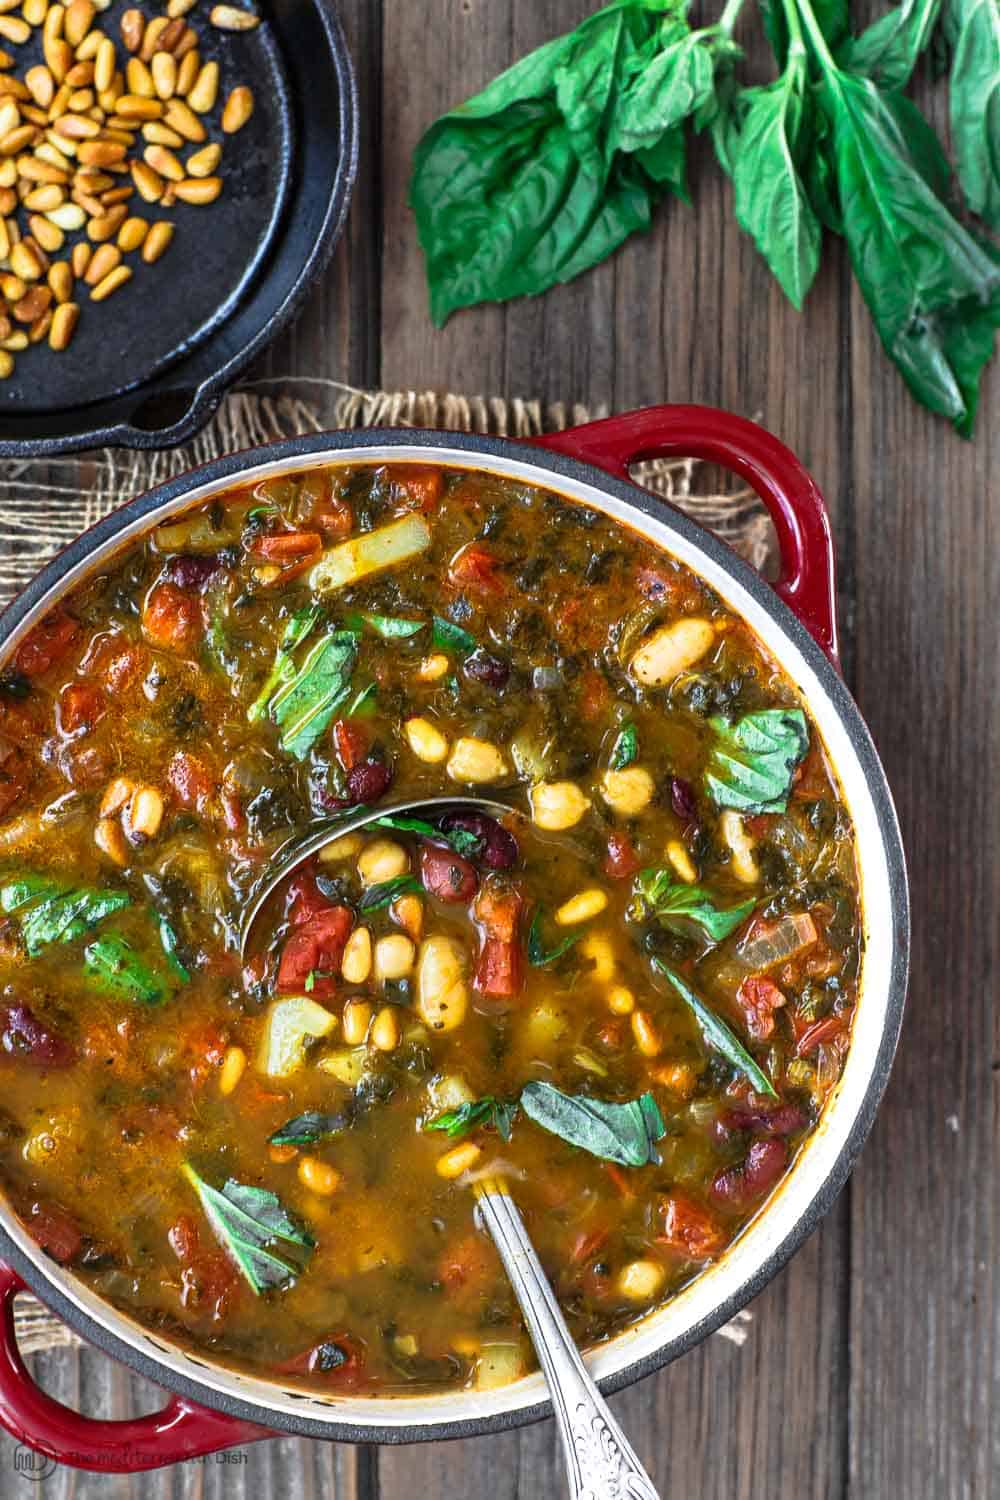 Mediterranean Bean Soup with Tomato Pesto | The Mediterranean Dish. Tons of flavor in this cozy bean soup loaded with vegetables, and Mediterranean flavors from spices and amazing fresh tomato pesto. This is not your average bean soup! A must try from TheMediterraneanDish.com #beansoup #mediterraneandiet #mediterraneanfood #mediterraneanrecipes #vegetablesoup #vegetarian #glutenfree #budgetfriendly #onepot #chickpeas #kidneybeans #beans #soup